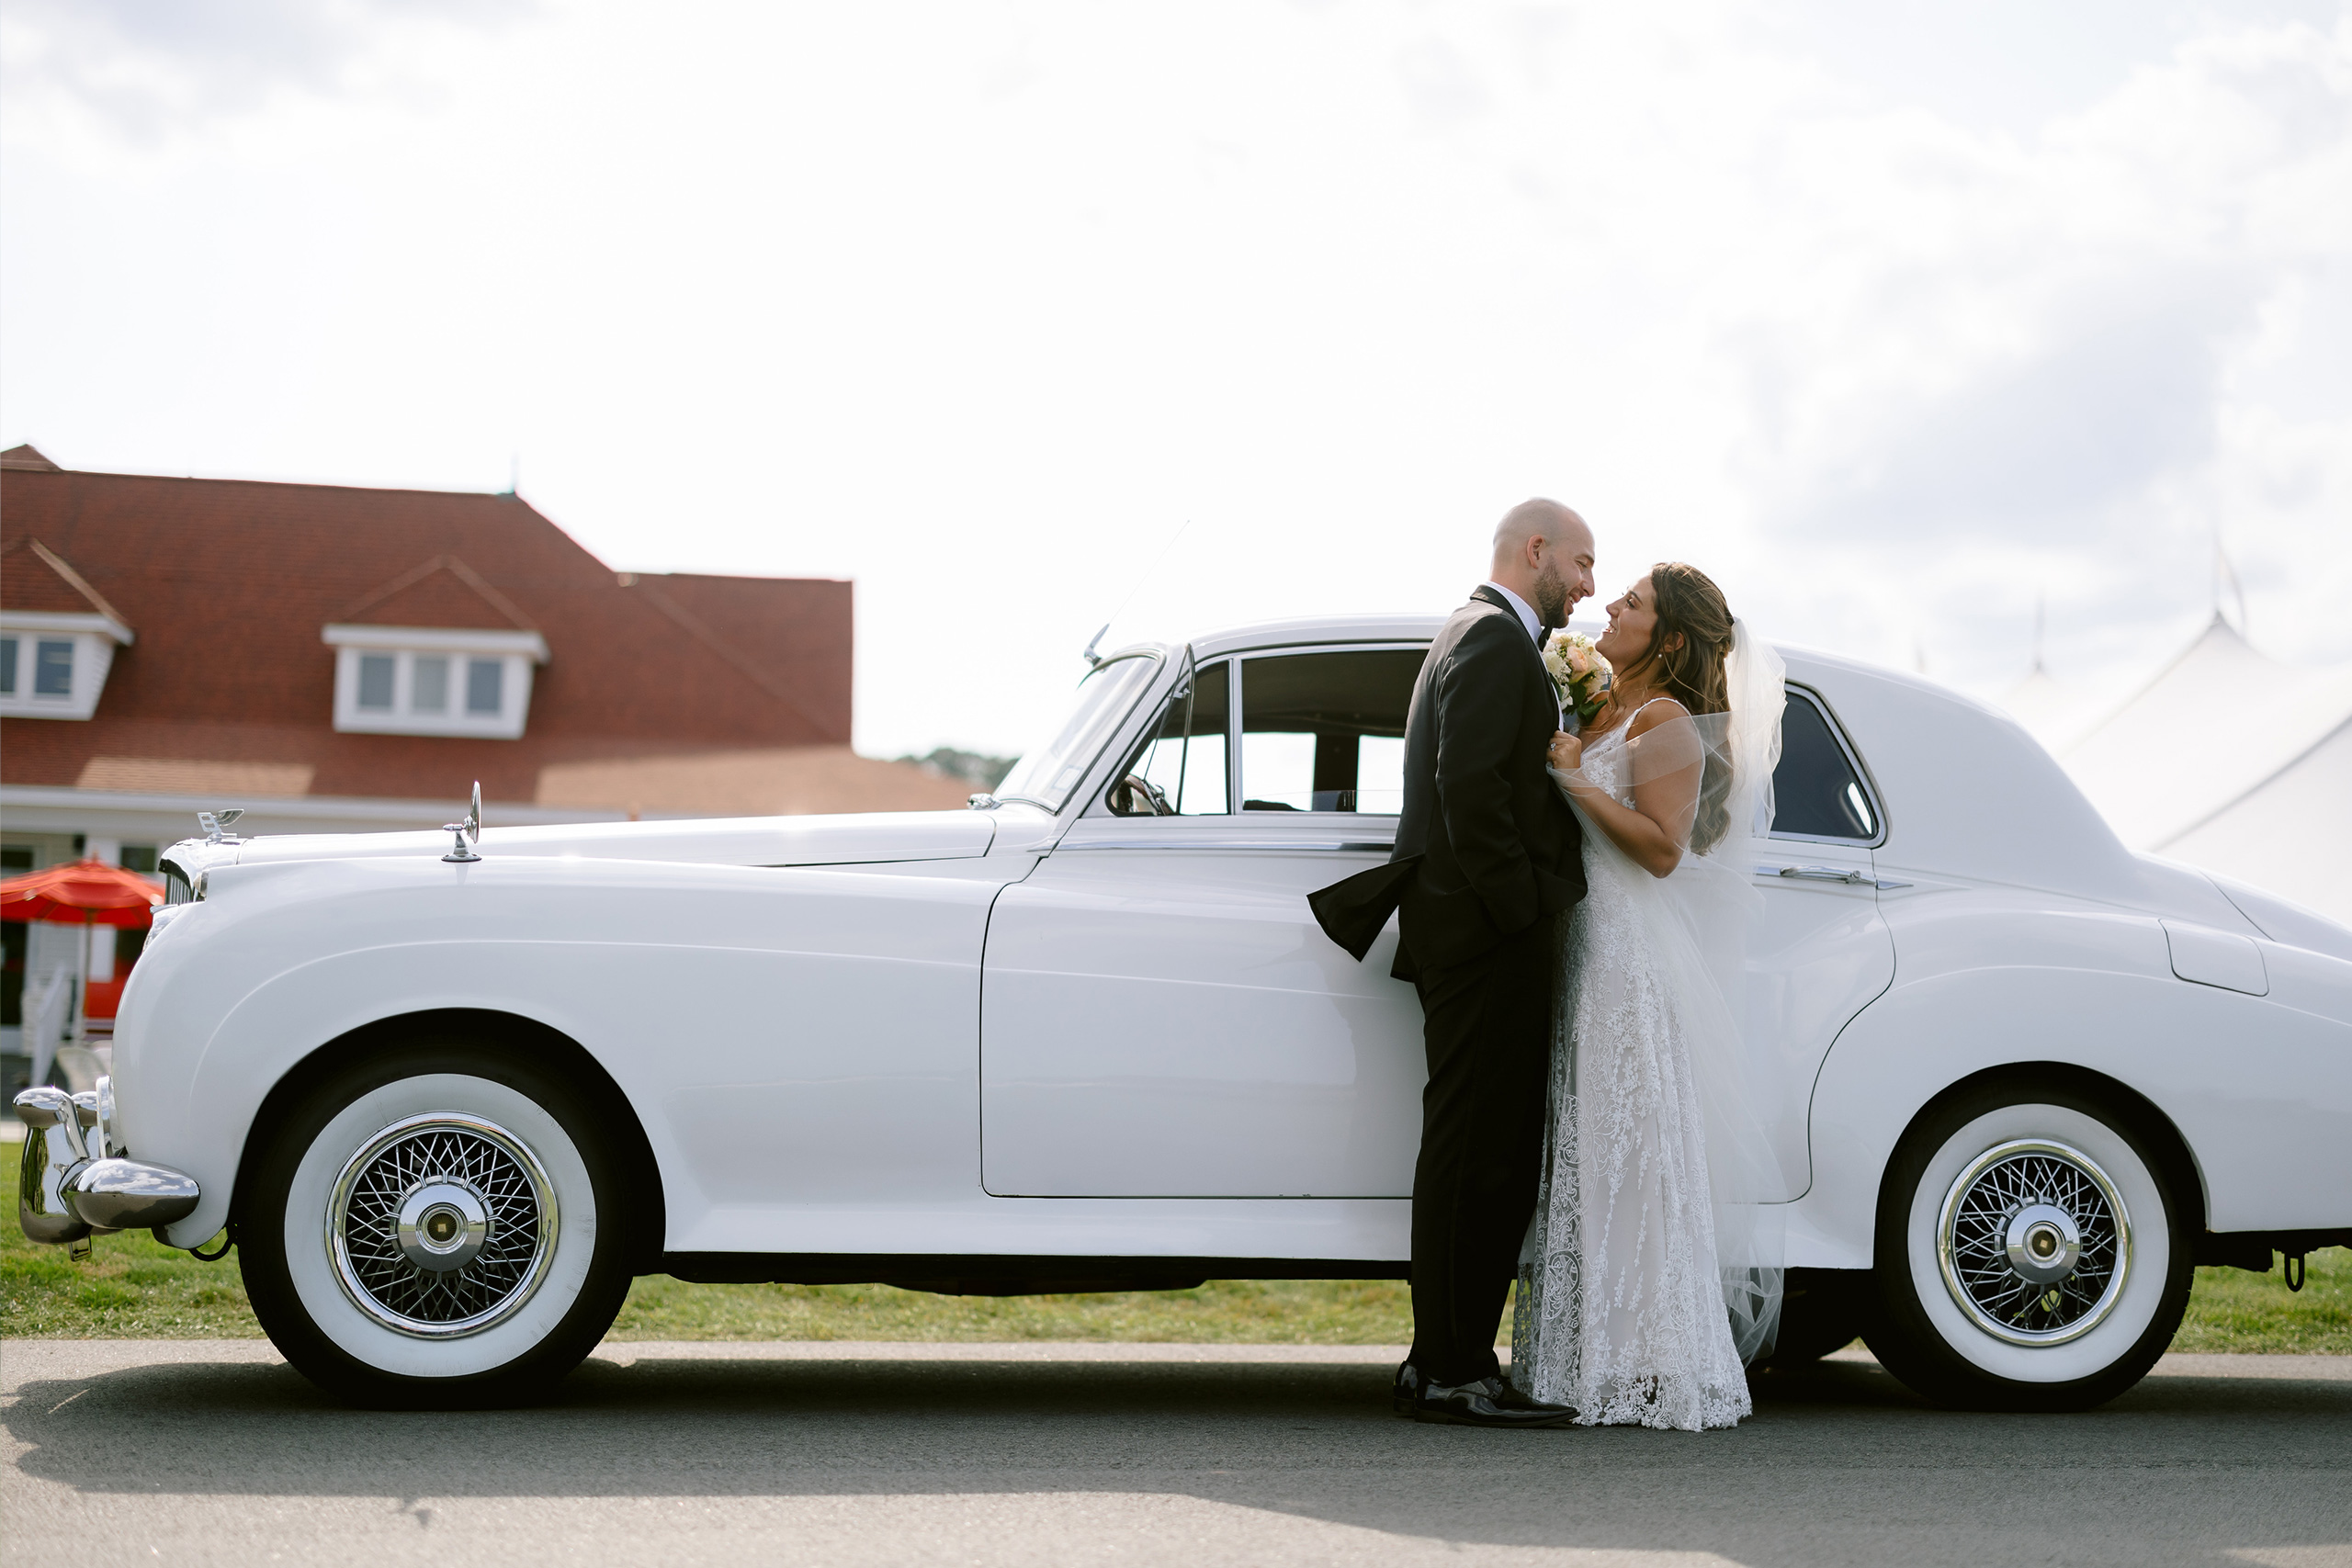 Groom and bride posing next to old fashion white car